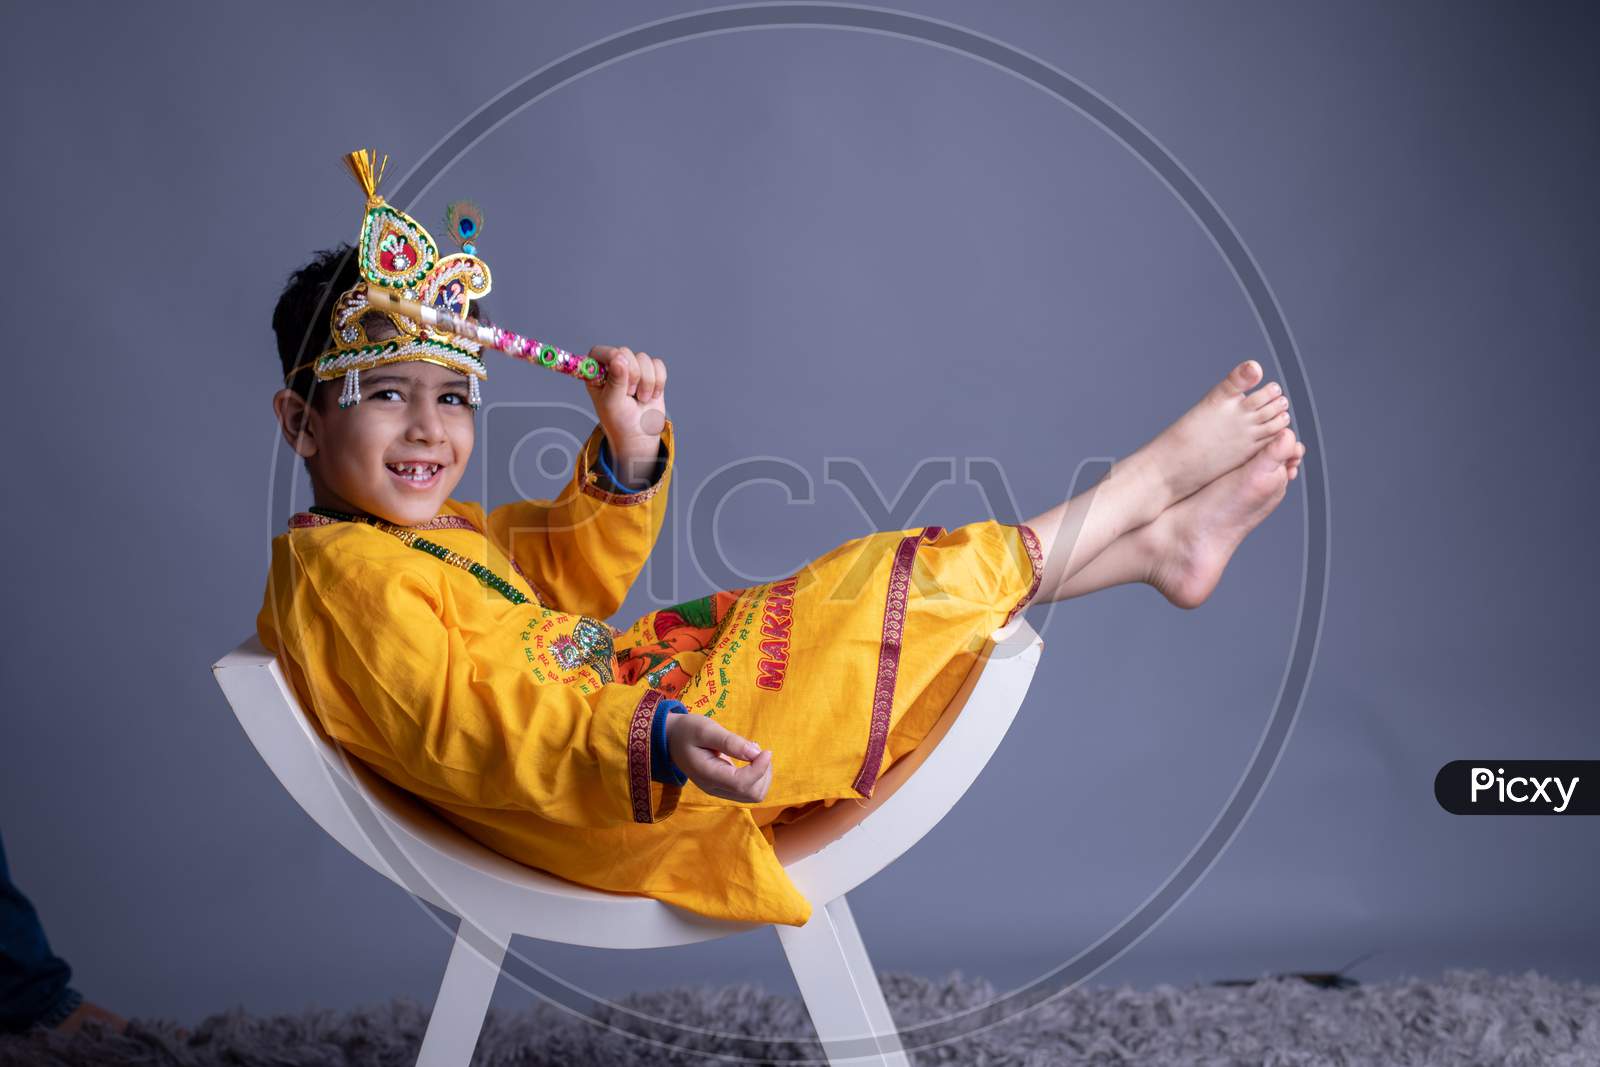 Young Indian Boy Dressed like Lord Sri Krishna And Posing Over an Gray Background